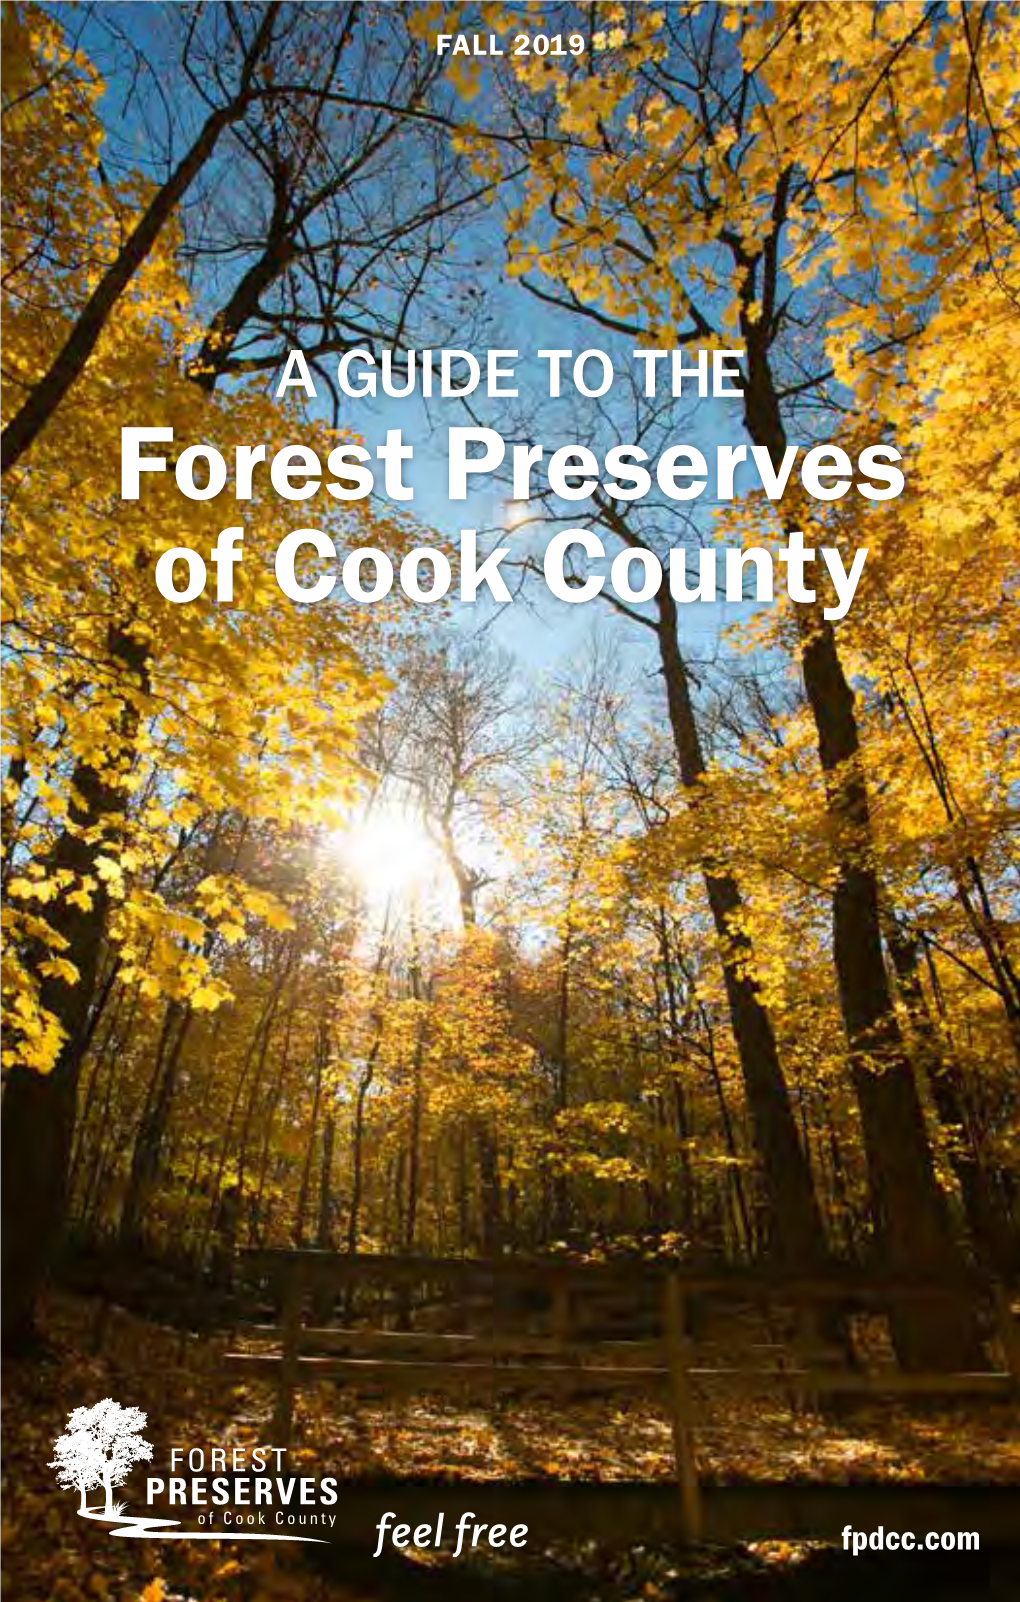 Fall 2019: a Guide to the Forest Preserves of Cook County